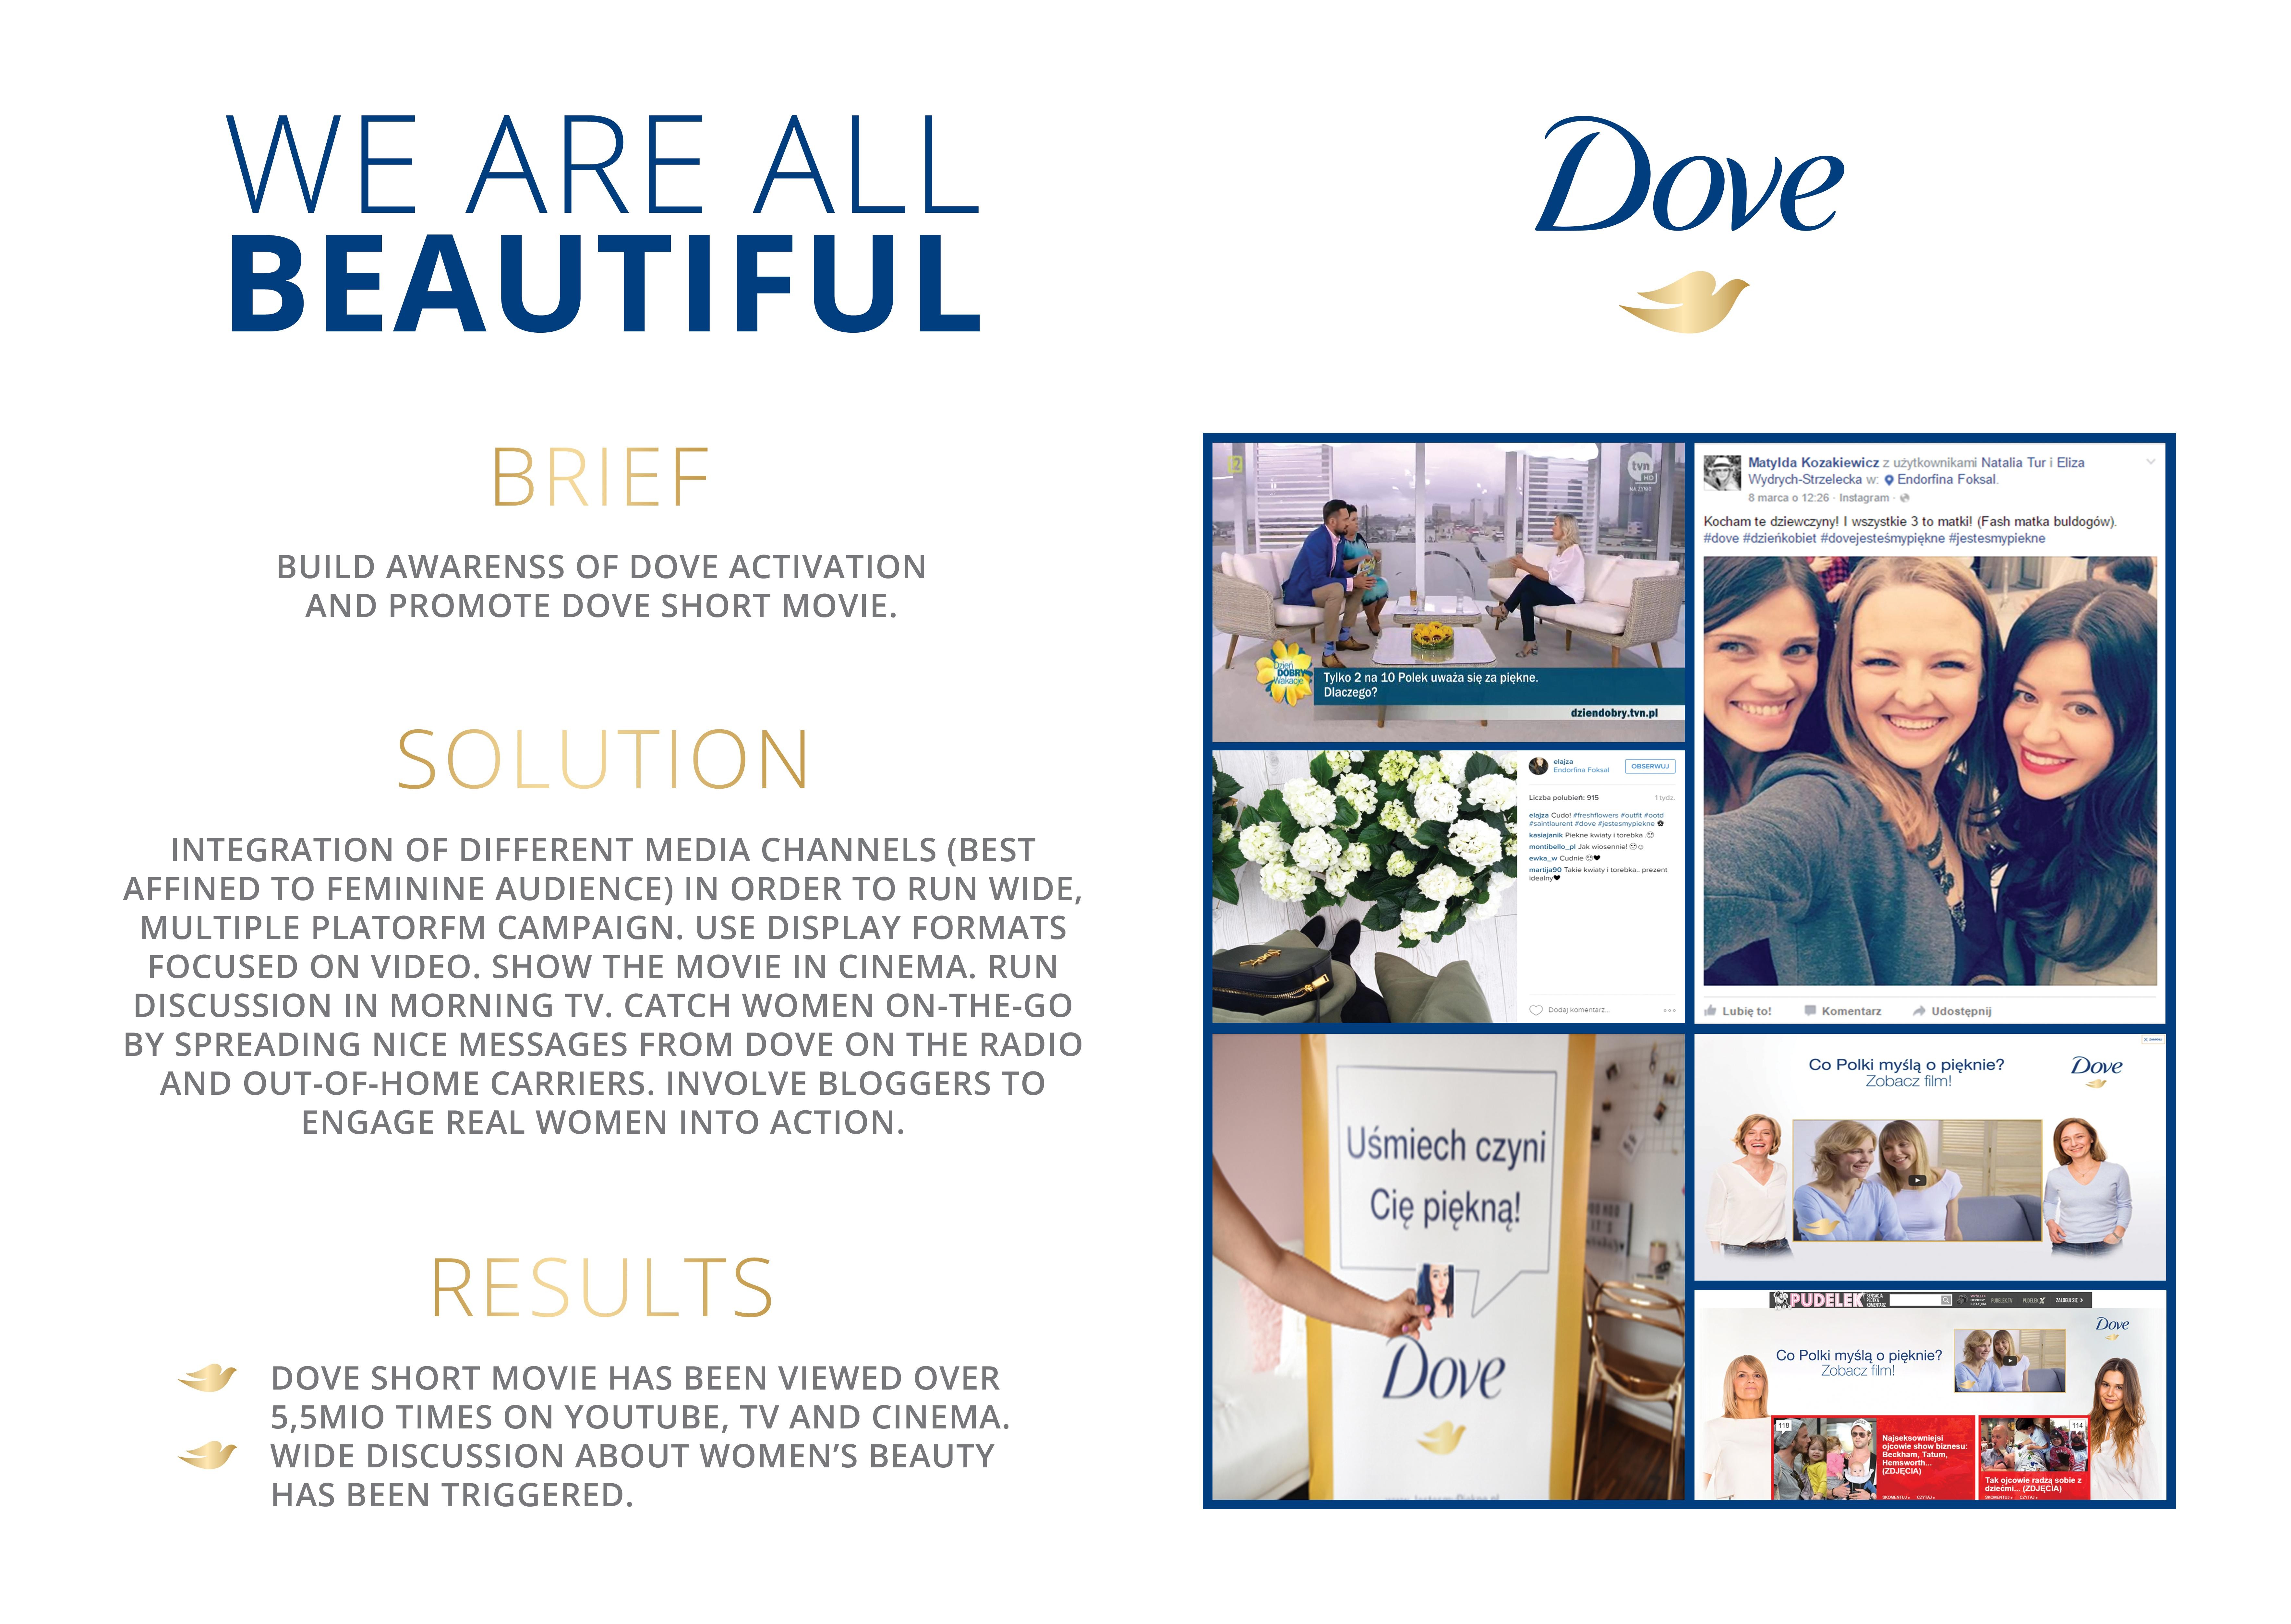 DOVE "We are all beautiful"